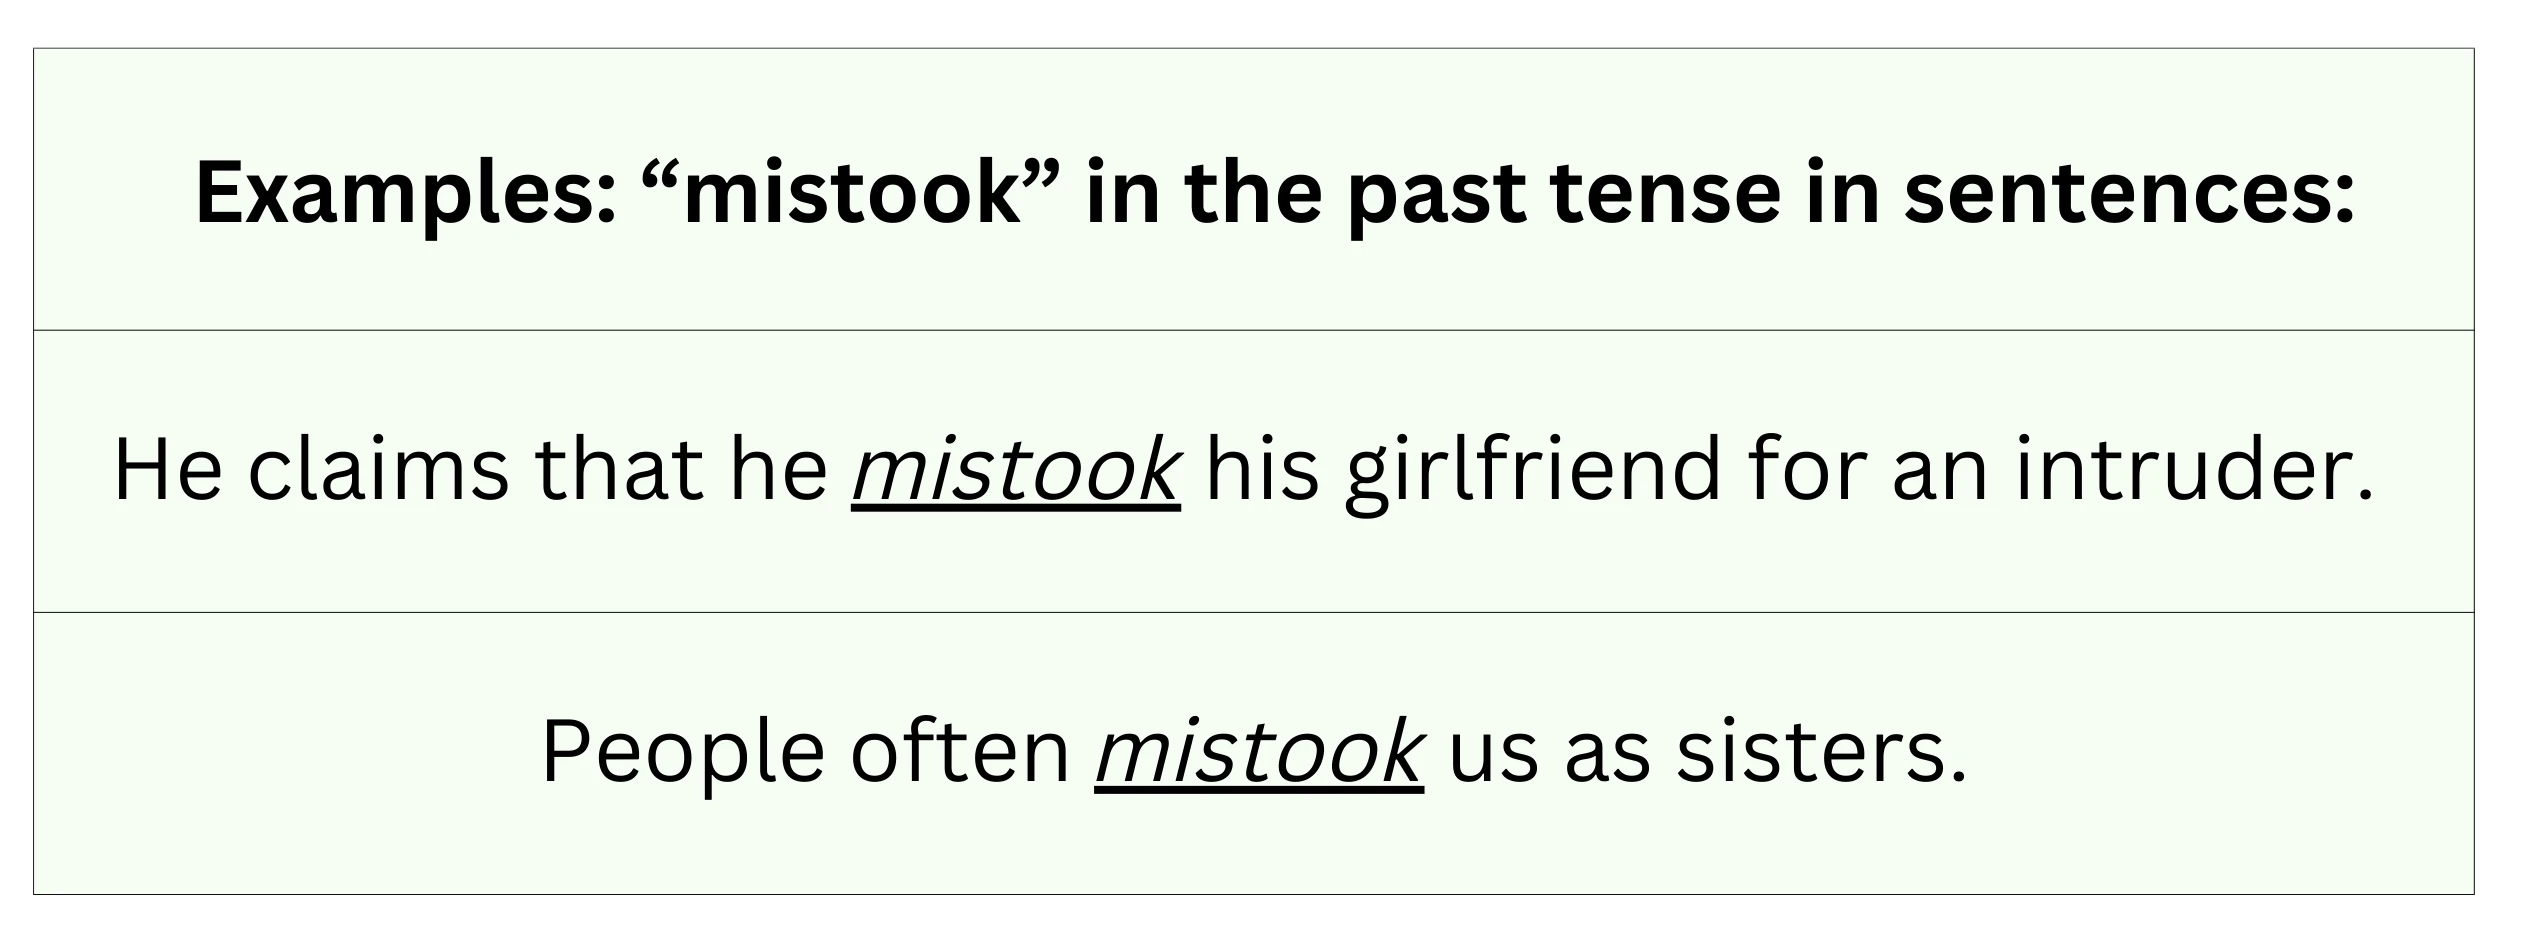 Past tense of mistake in sentences.